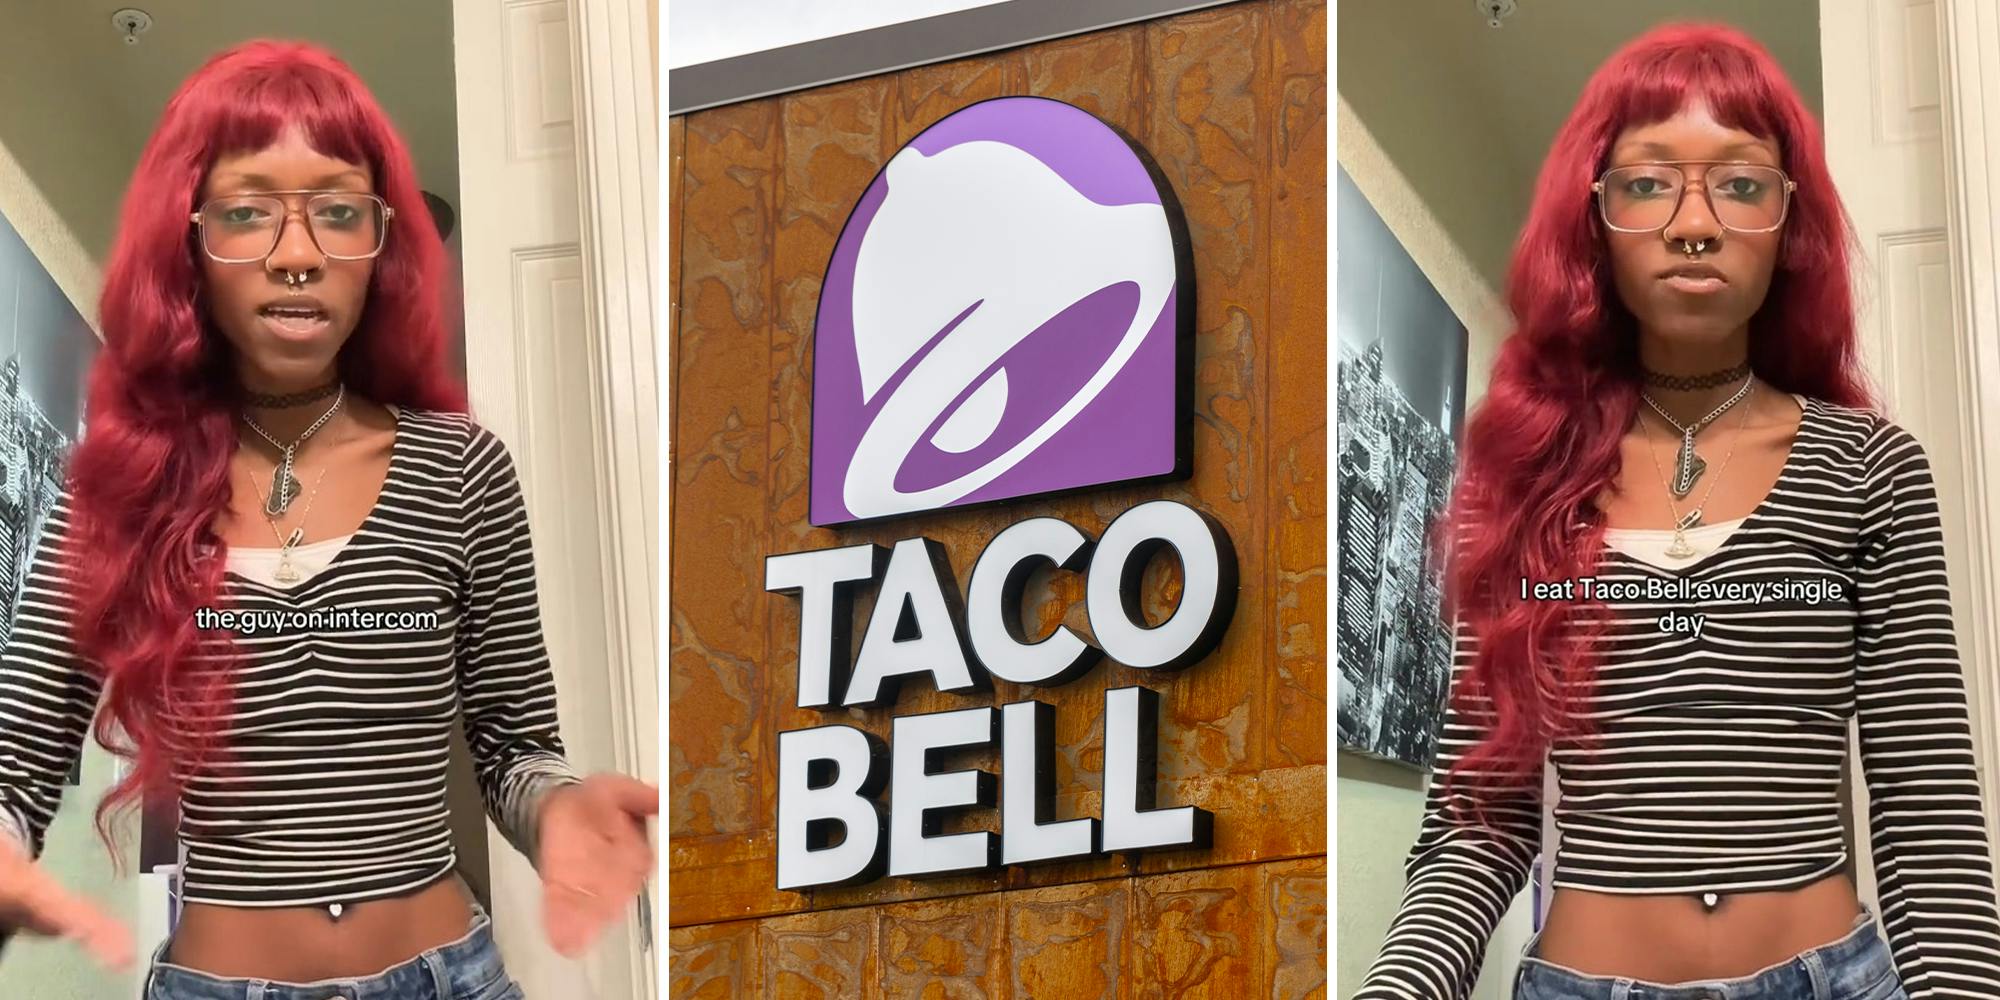 ‘I’m not donating, OK?’: Taco Bell customer says drive-thru worker still rounded up after she said ‘no’ to donating